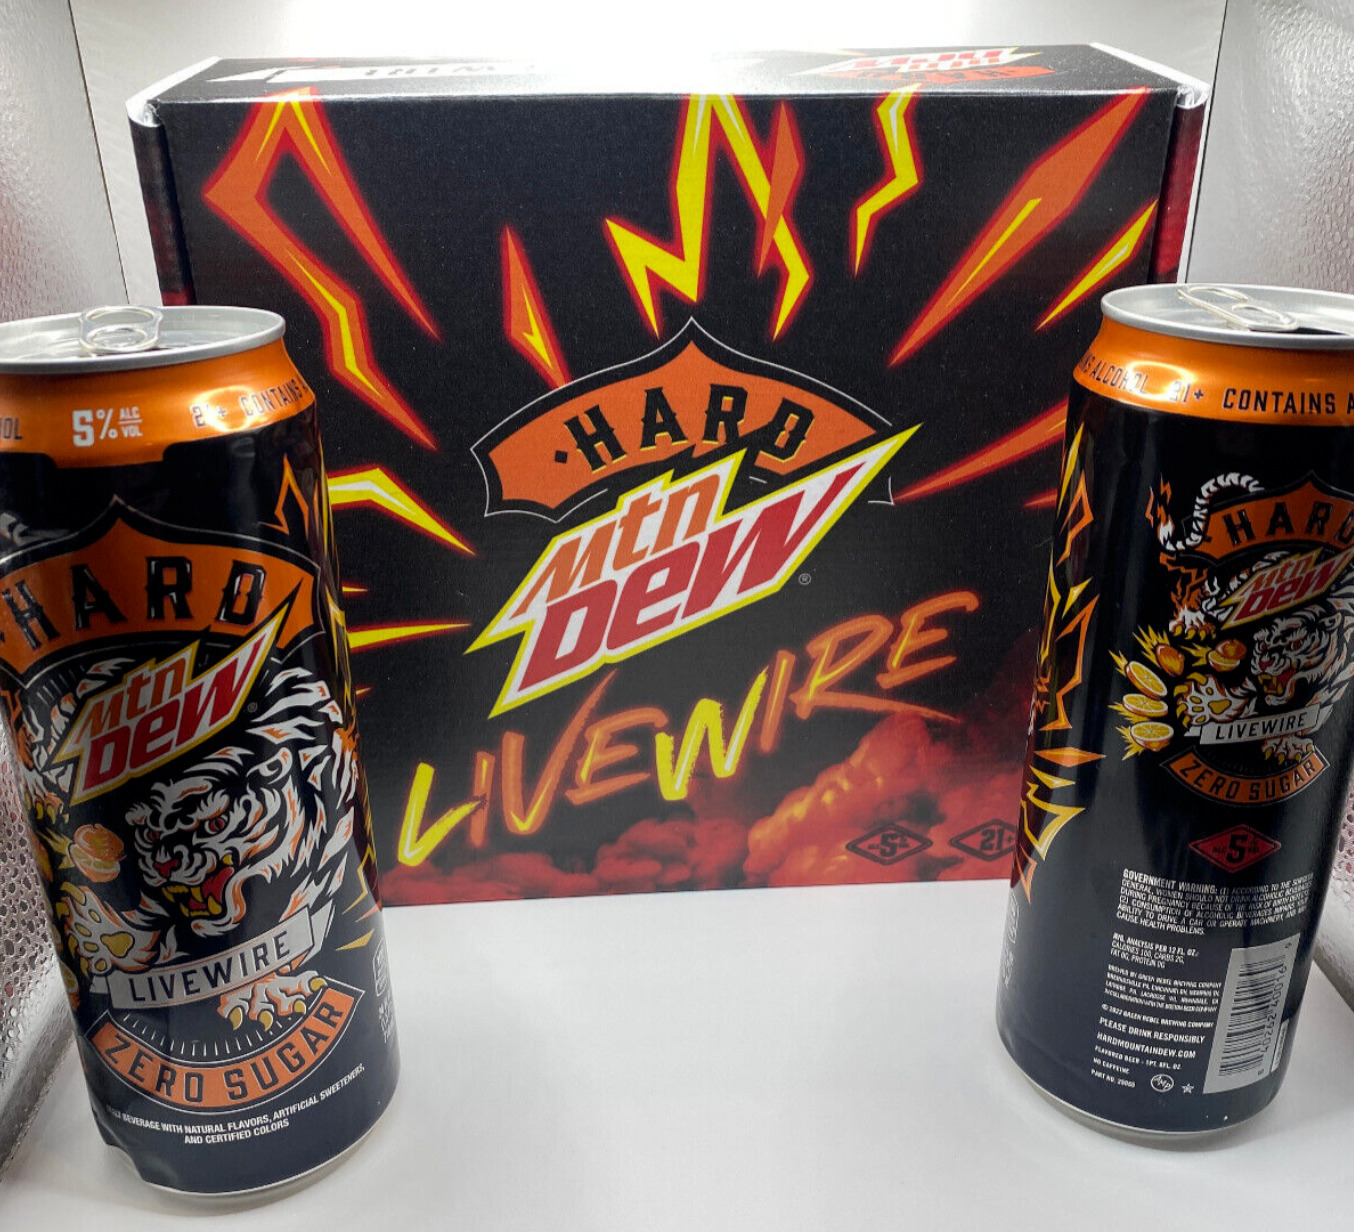 Hard MTN Dew Livewire Promotional Package Mountain Dew Empty Cans Box No Alcohol